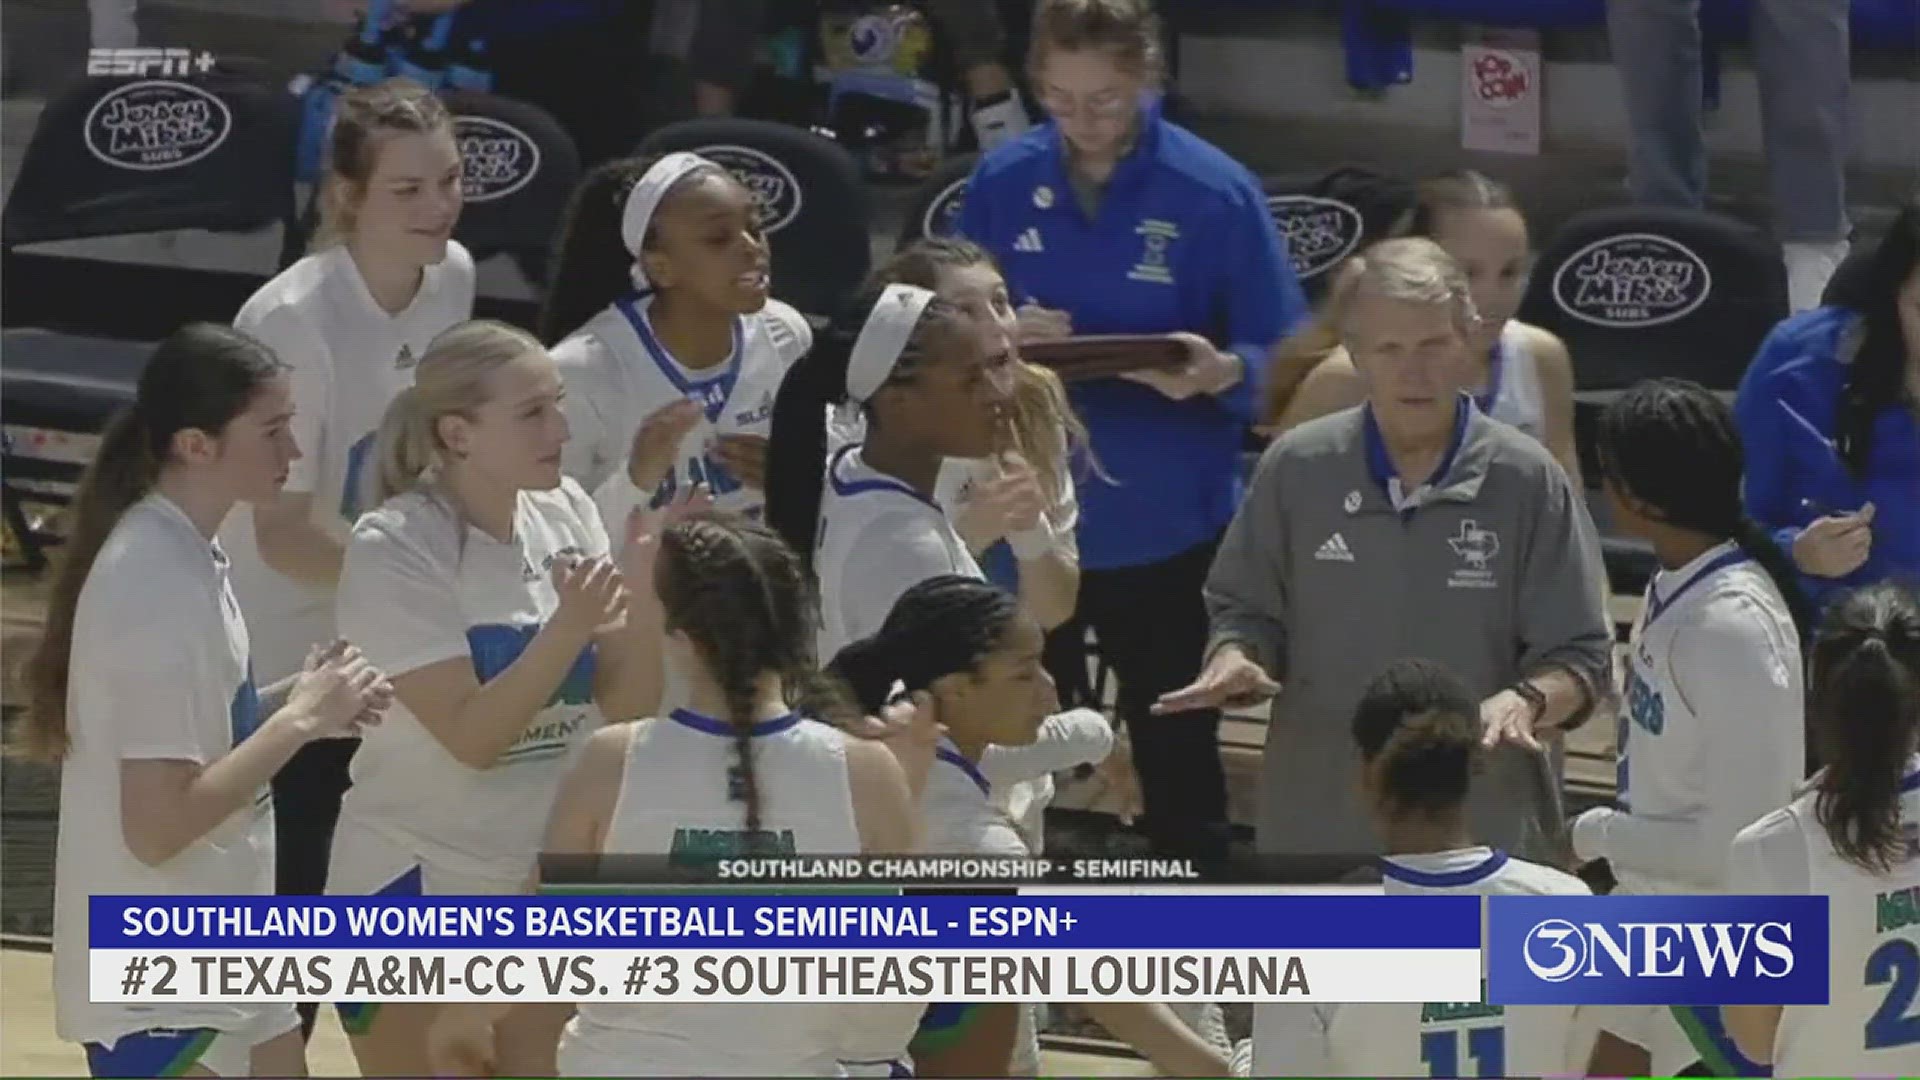 Allen scored the last eight points of the game in a 60-59 win over Southeastern Louisiana. Highlights courtesy ESPN+.